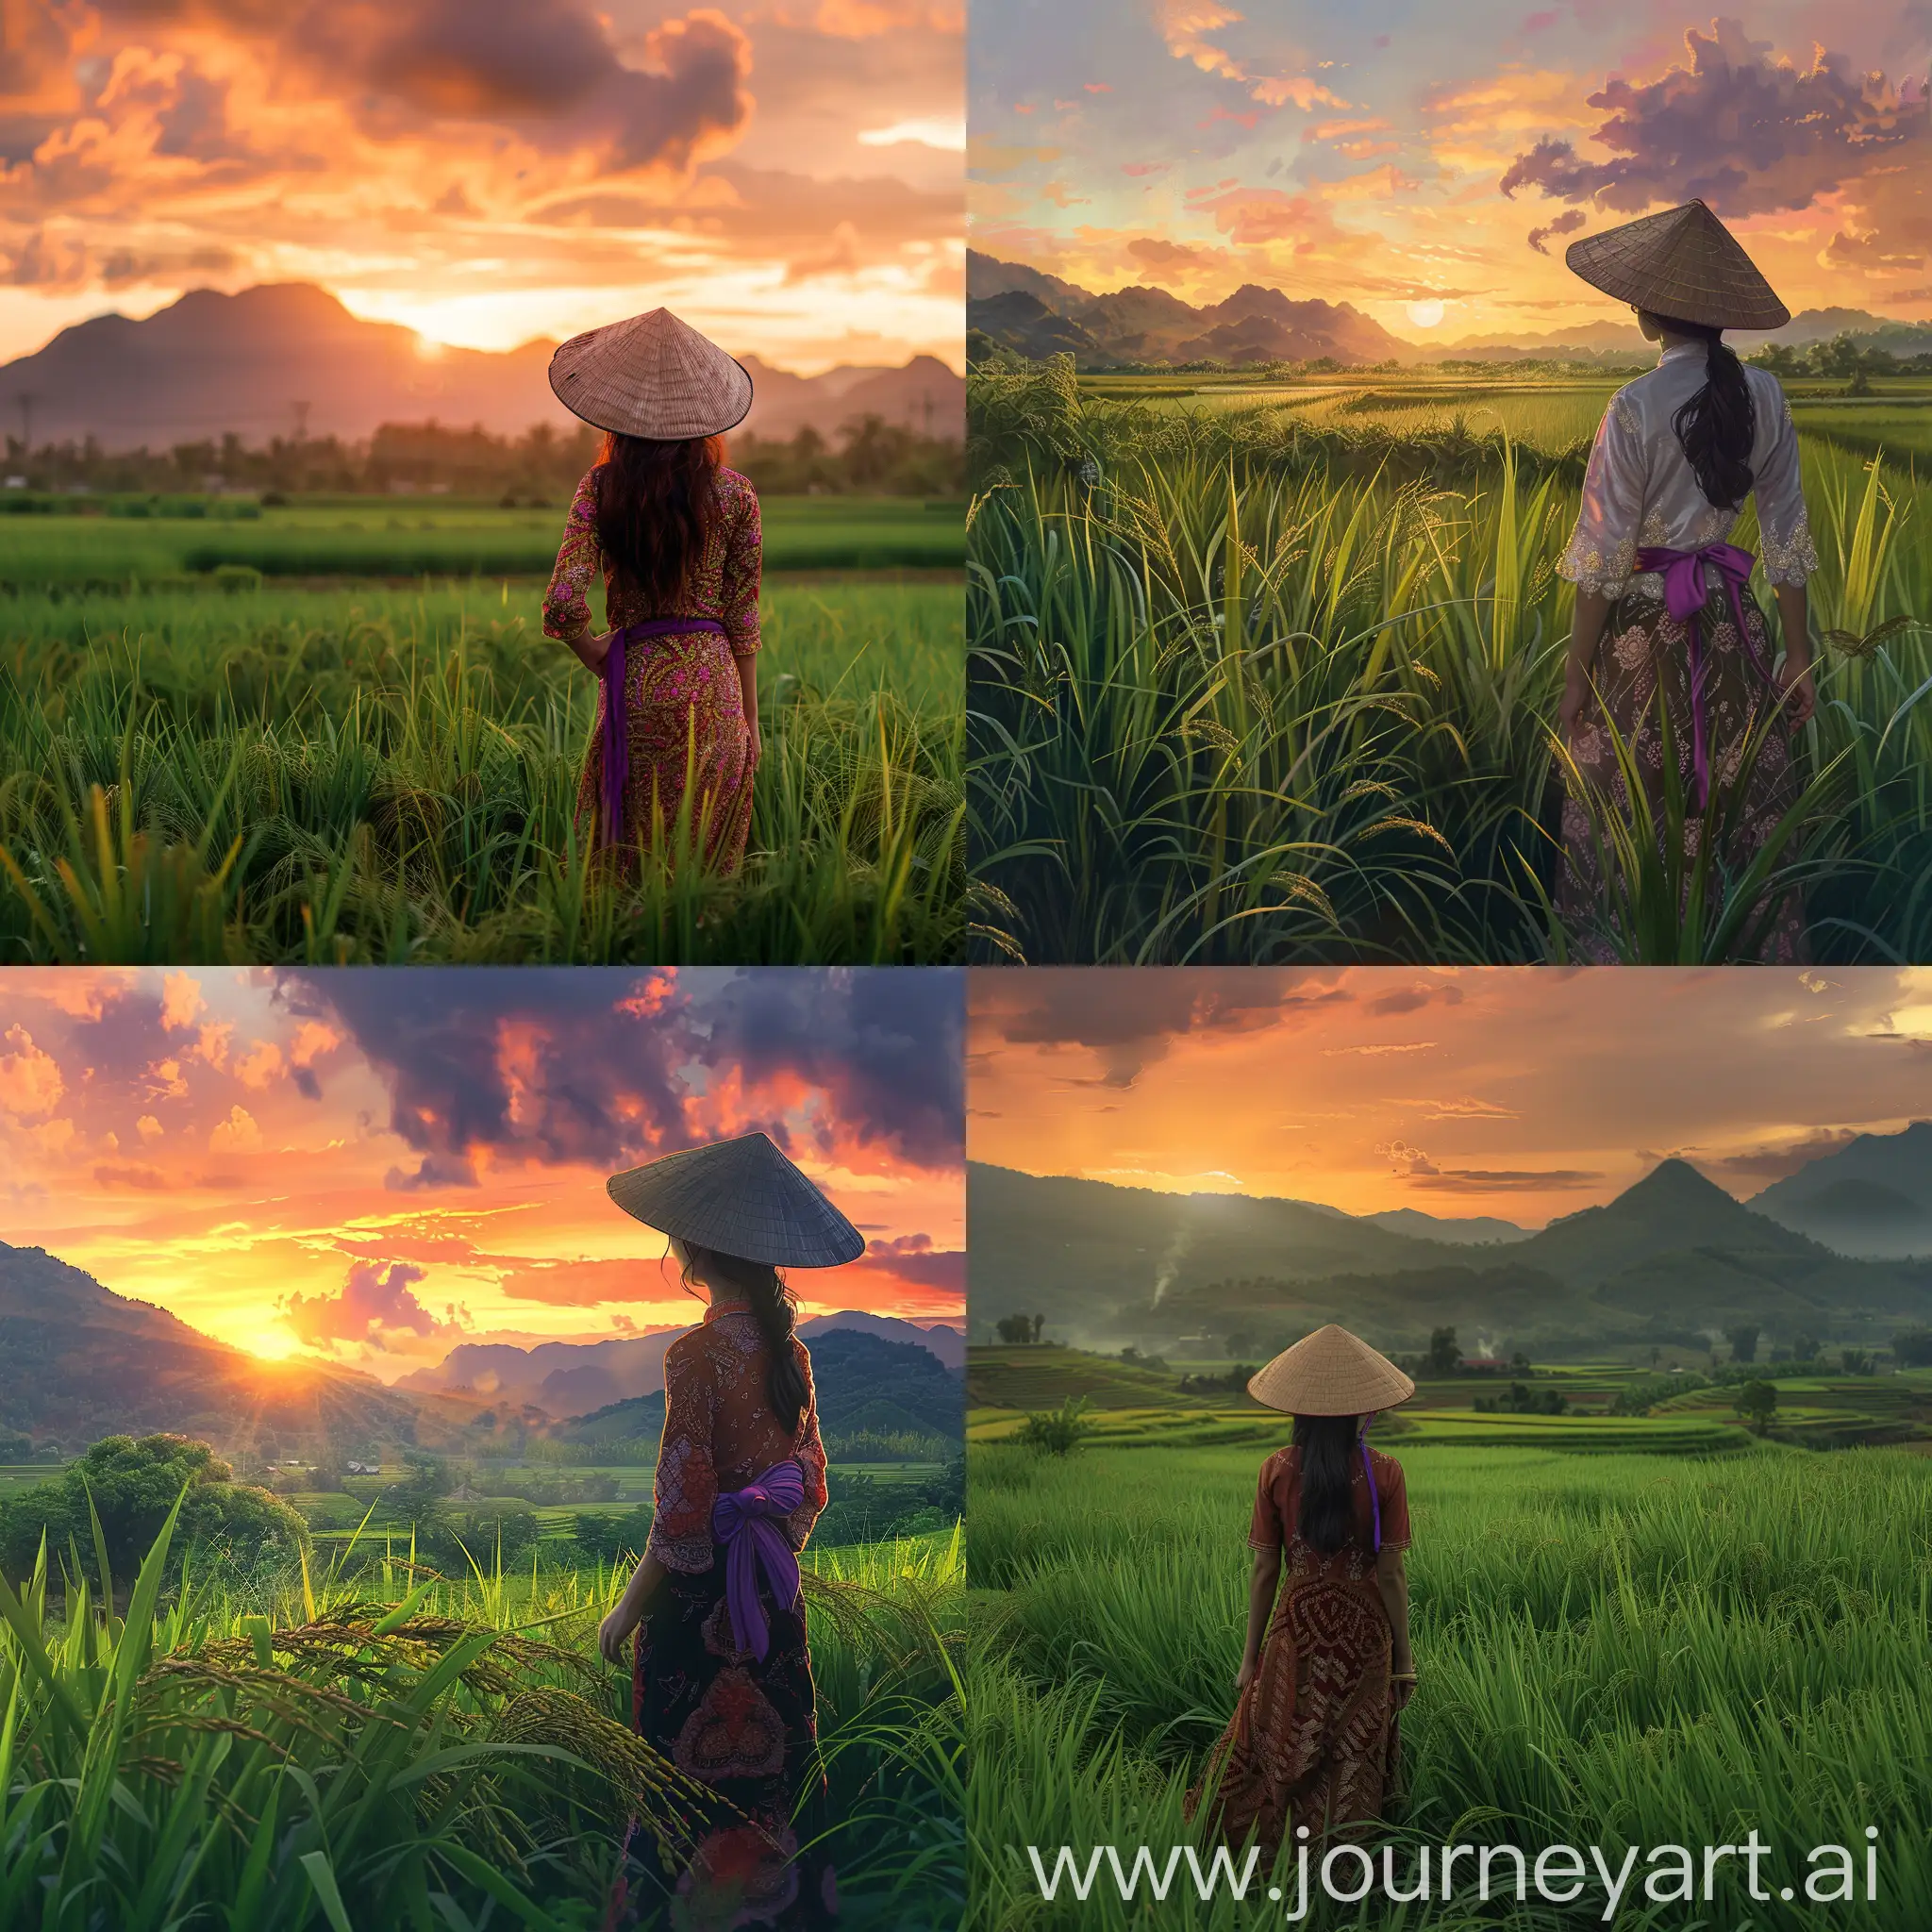 A young Vietnamese woman standing in a lush, green rice field at sunset, wearing a traditional dress with intricate embroidery and a conical hat with purple ribbons.The sky is painted with warm hues of orange and pink as the sun sets behind distant mountains.The scene is serene and beautiful,capturing the essence.